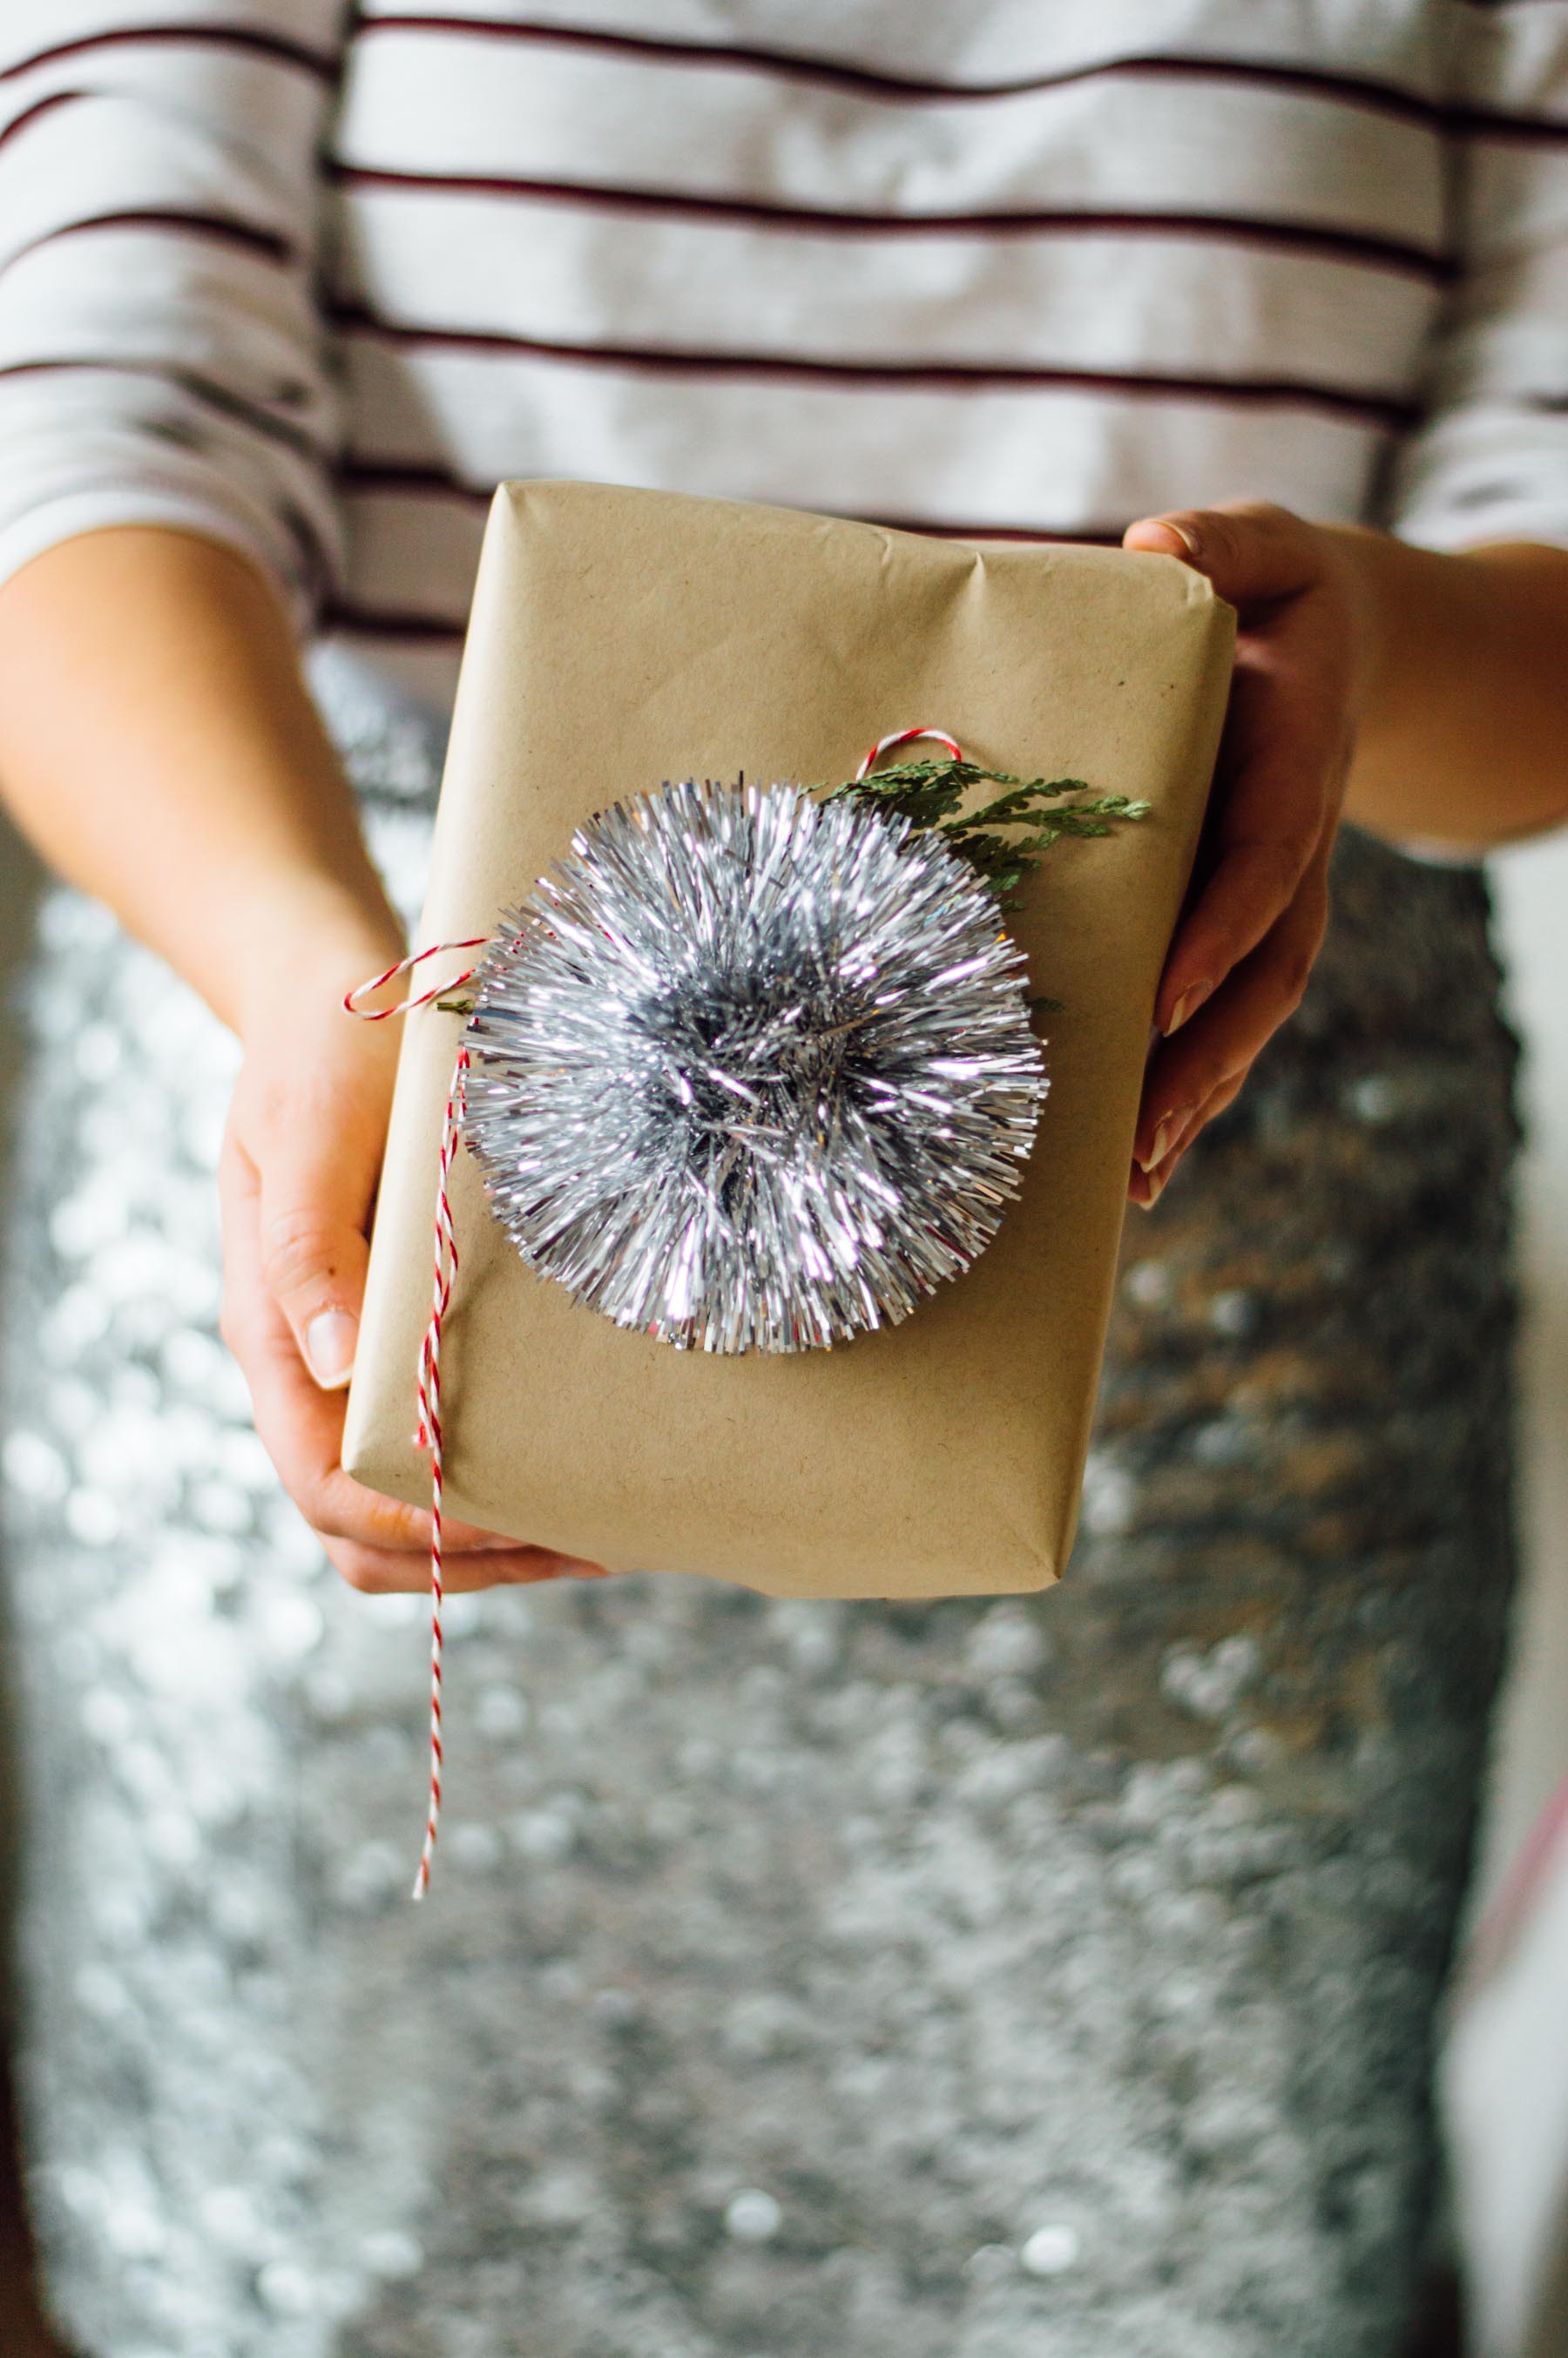 Wrap your holiday gifts this year with fresh greenery and surprises! Click through for the full article with holiday gift wrapping tips & tricks. | bygabriella.co